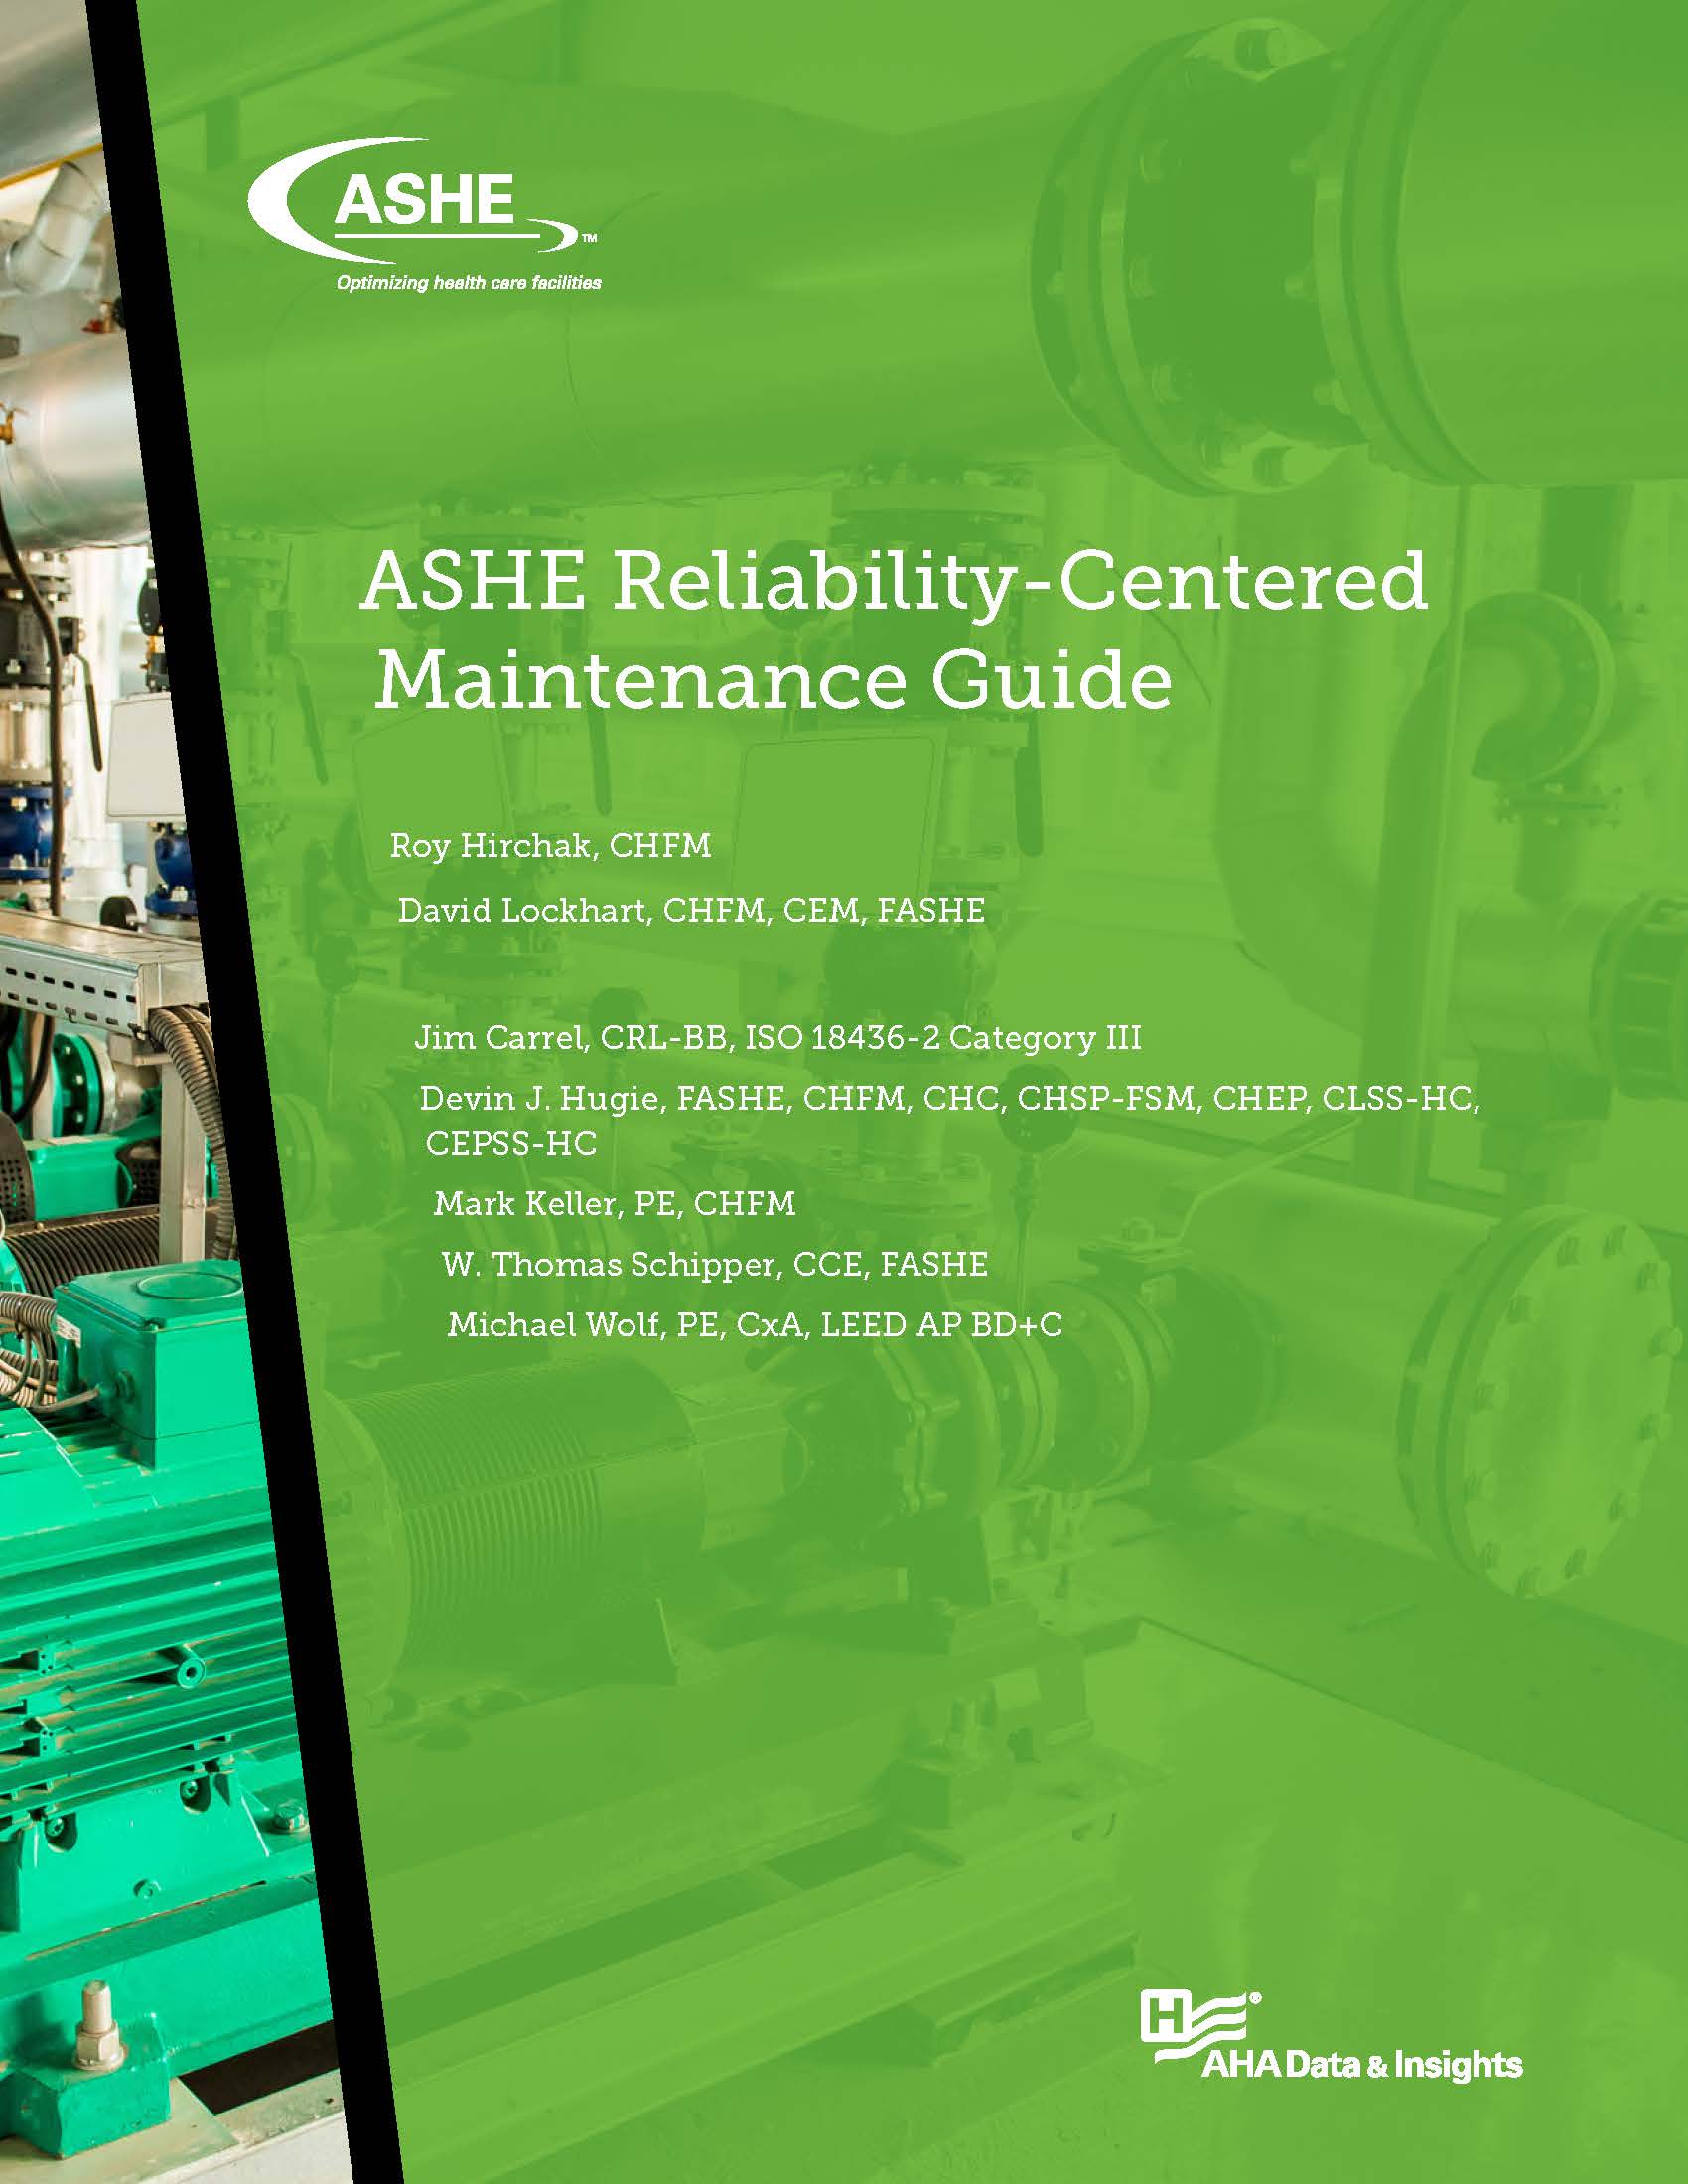 ASHE Reliability-Centered Maintenance Guide: Digital Edition